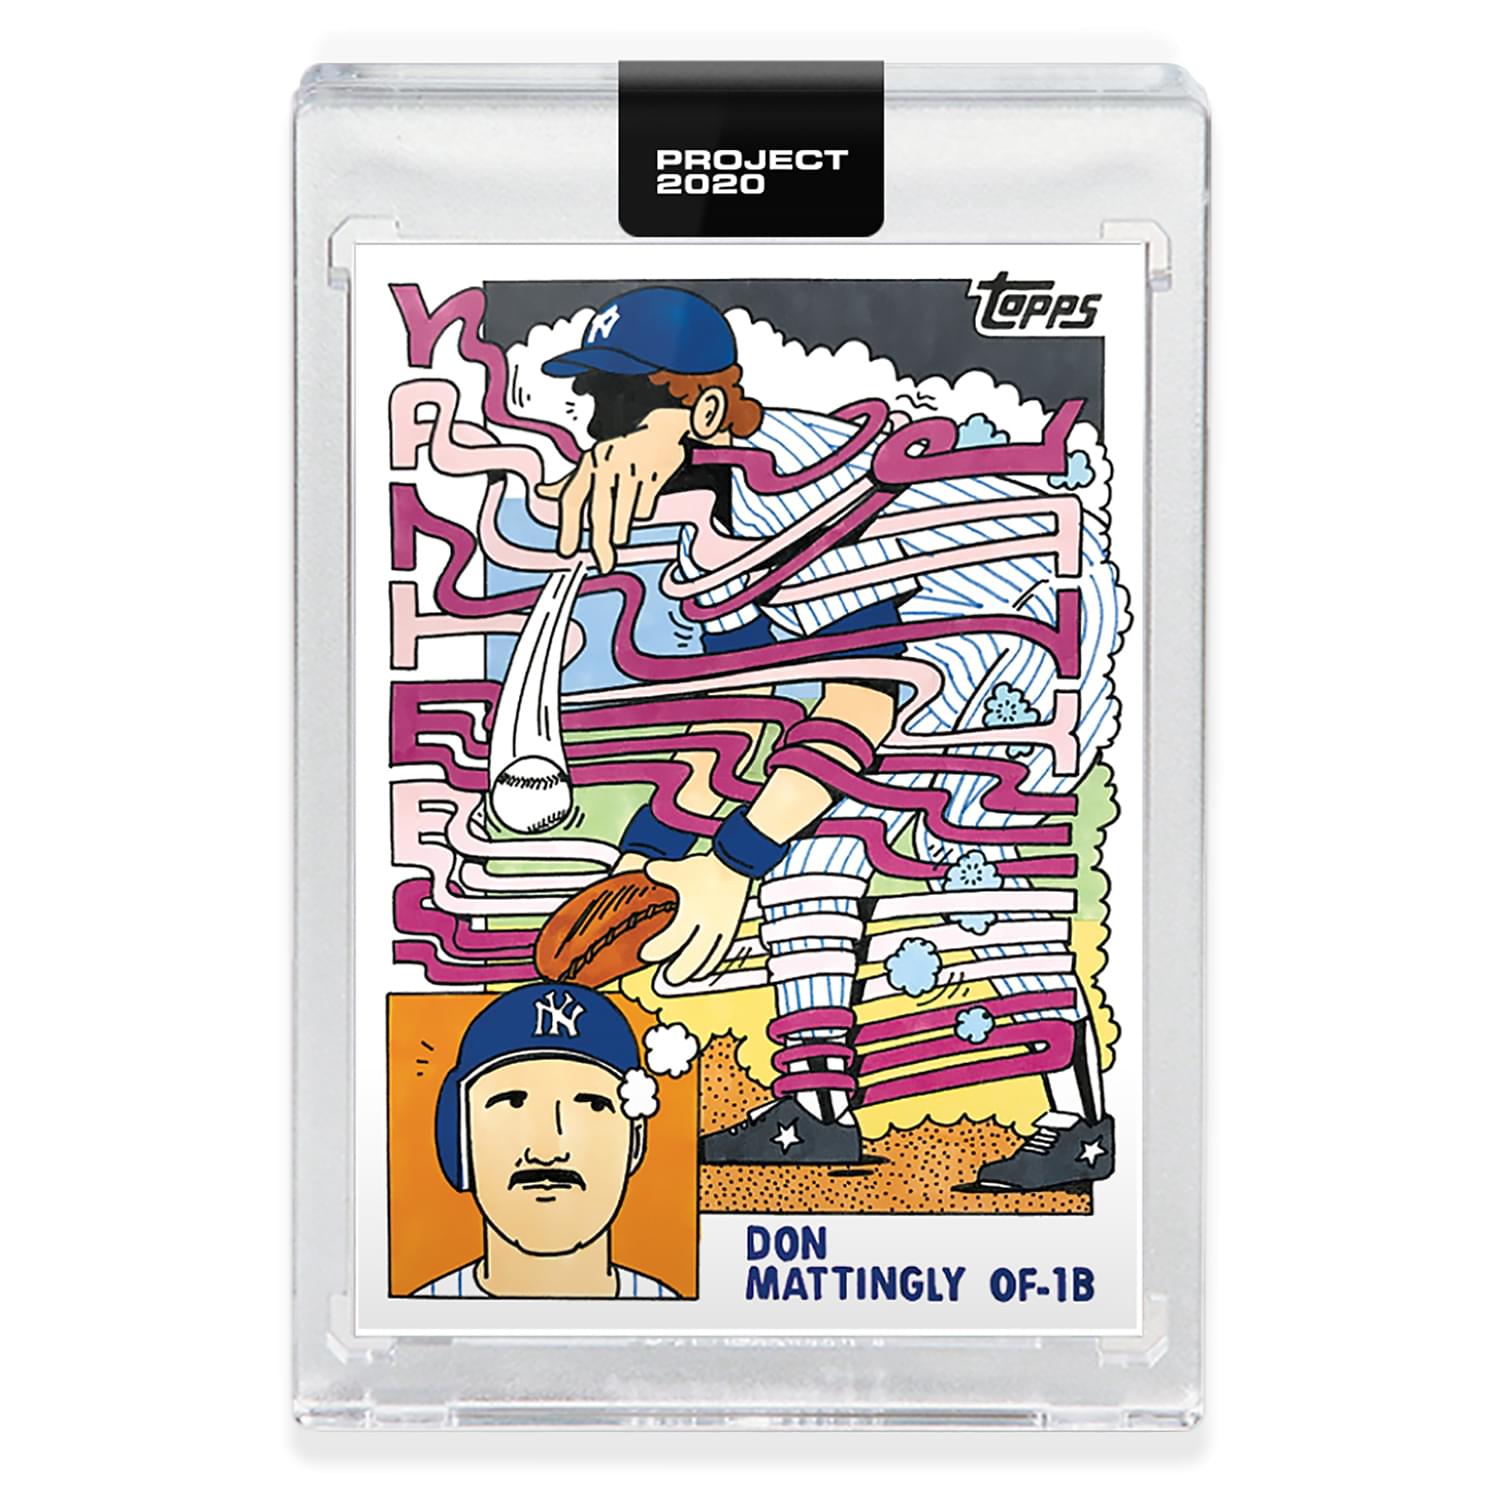 Topps PROJECT 2020 Card 269 - 1984 Don Mattingly by Ermsy